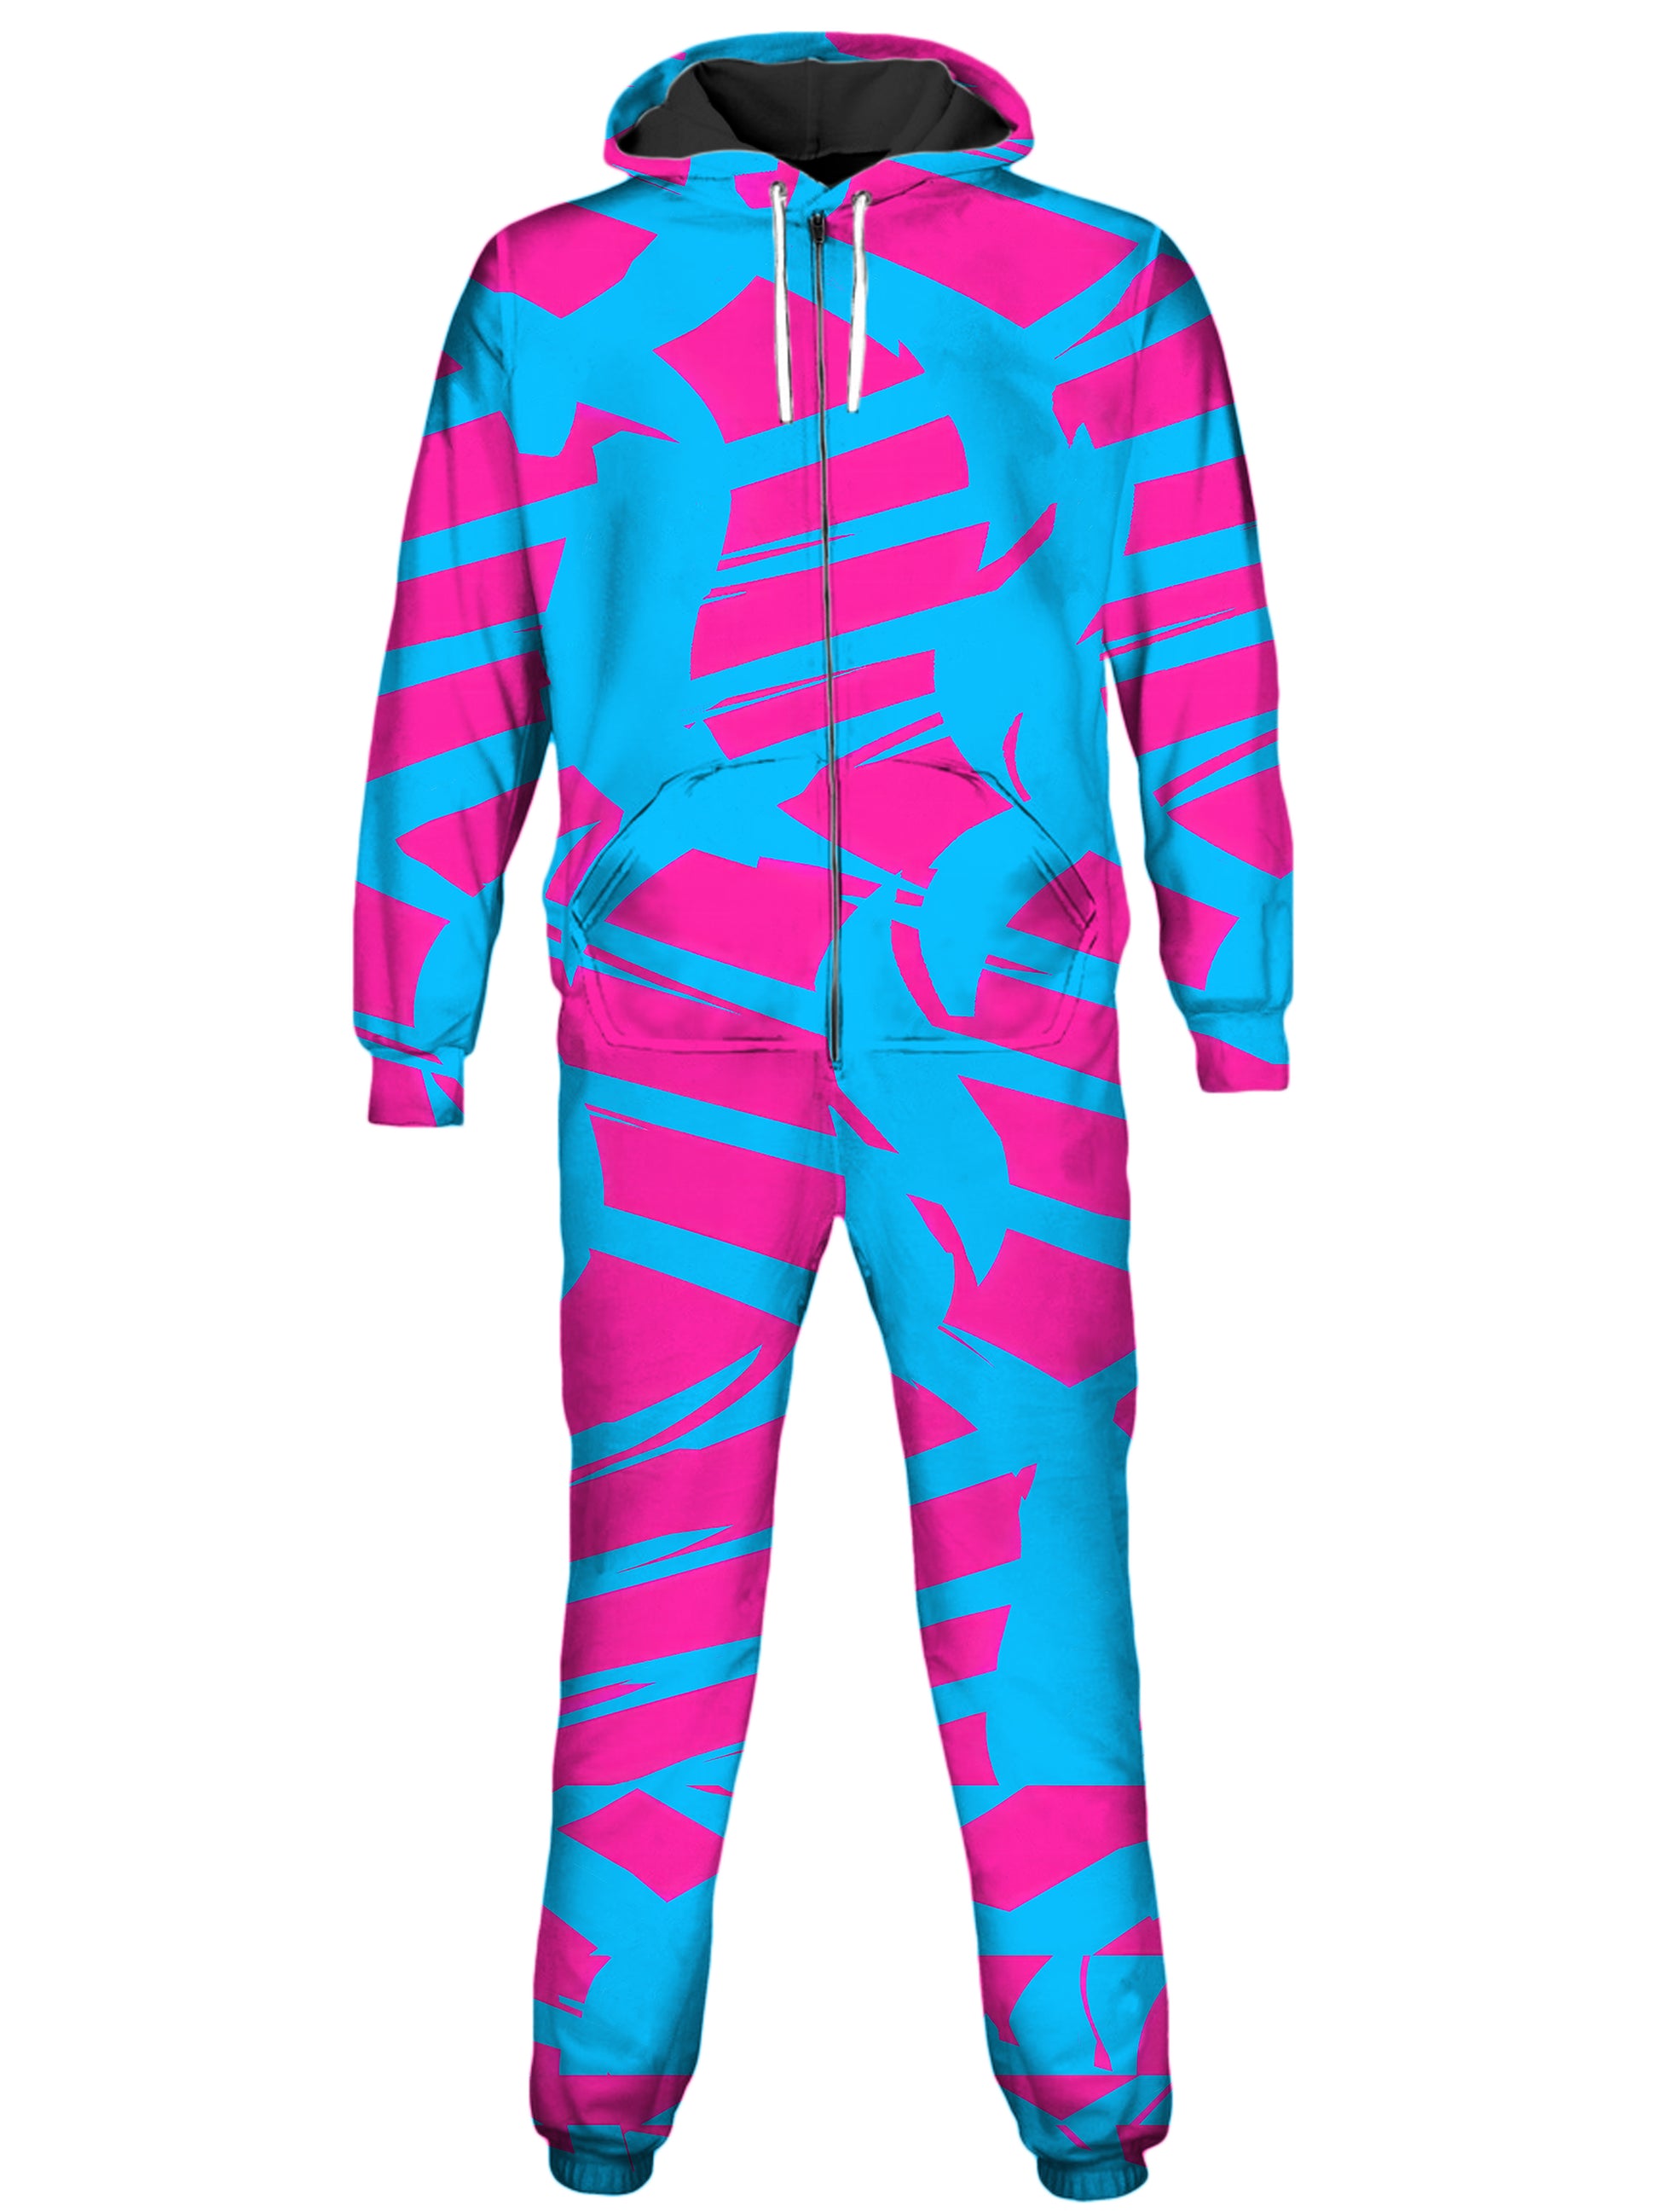 Pink and Blue Squiggly Rave Checkered Onesie, Big Tex Funkadelic, | iEDM